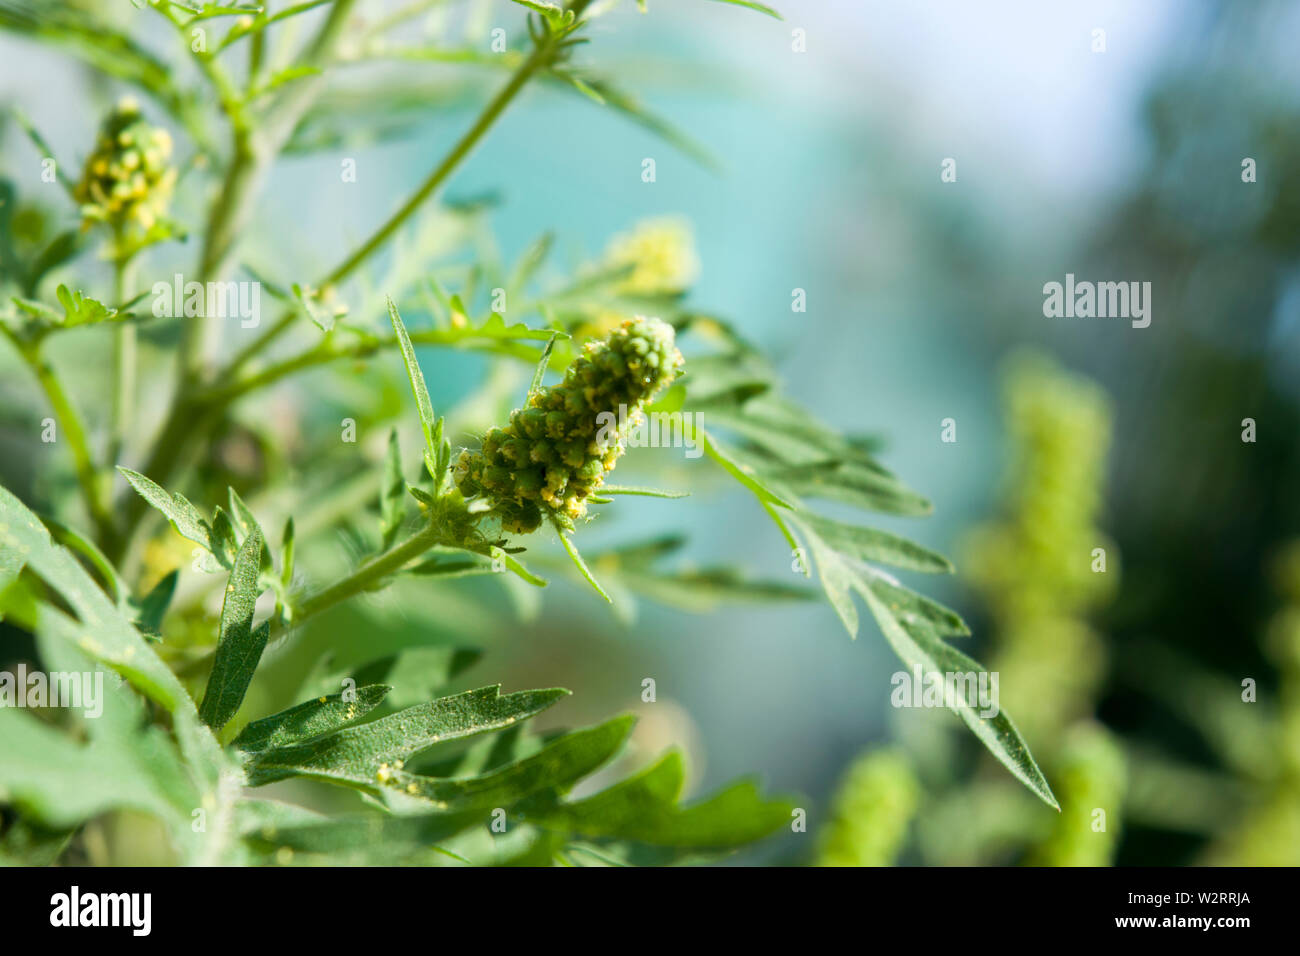 Ragweed tiny green flowers produce copious amounts of pollen, making it a major causative agent of hay fever in some areas. Stock Photo